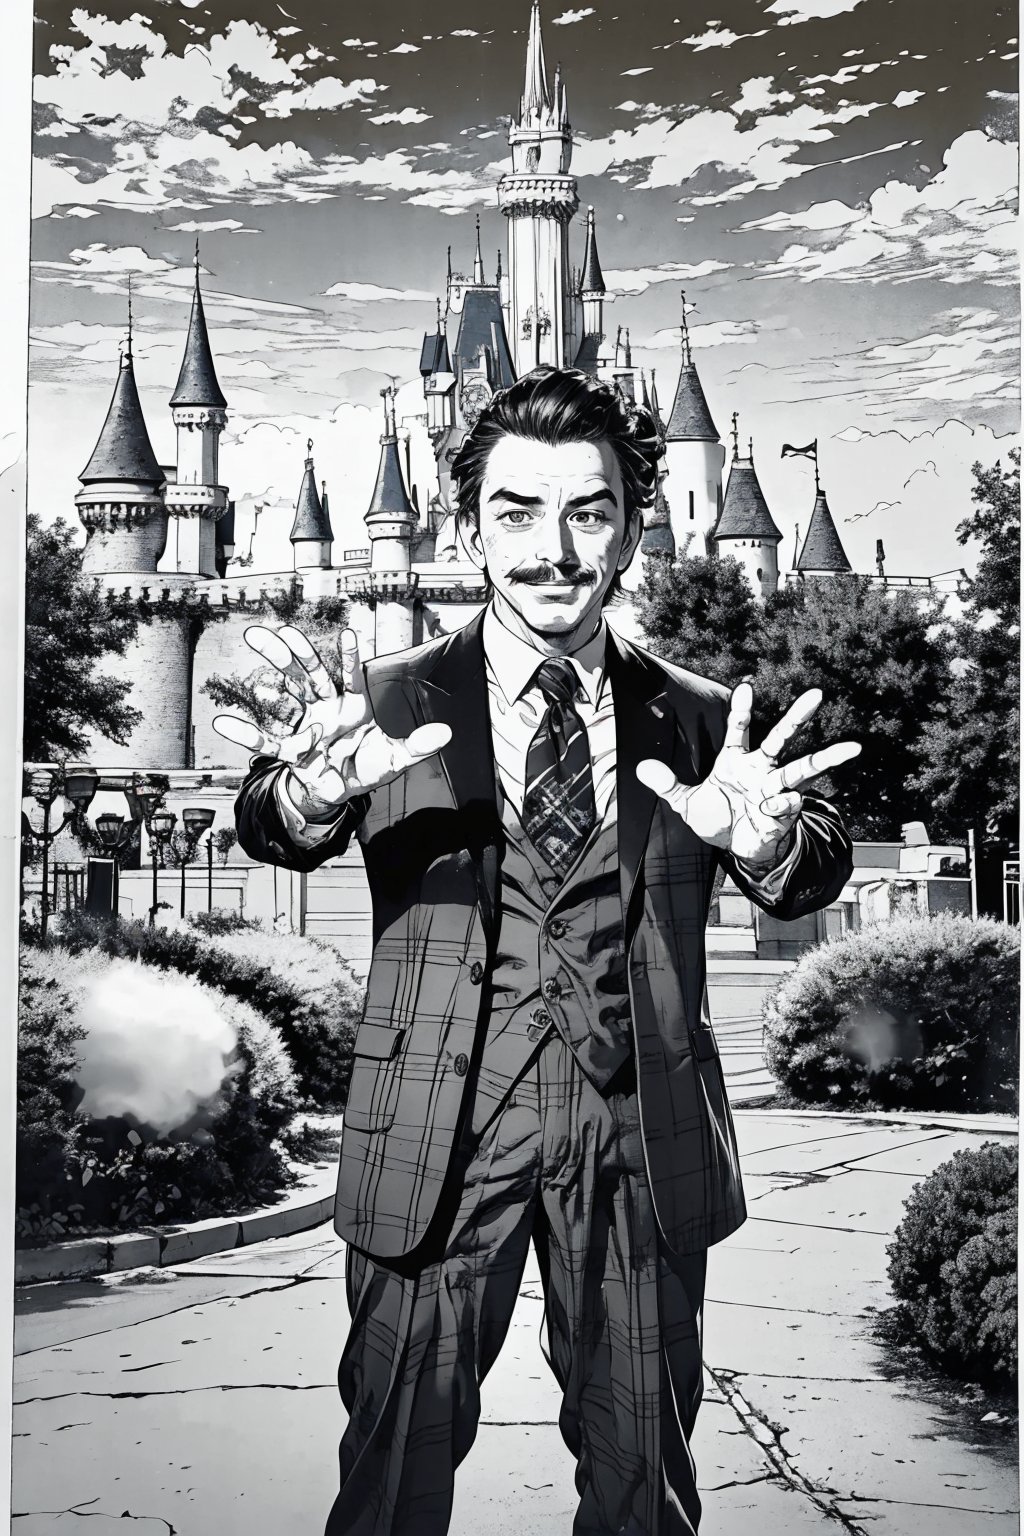 boichi manga style, monochrome, greyscale, solo, a young man, he is Walt Disney, the founder of Disneyland, slicked hairstyle, mustache, traditional plaid suit, smile, happy, open his hands, full body shot, a country station background, ((masterpiece))